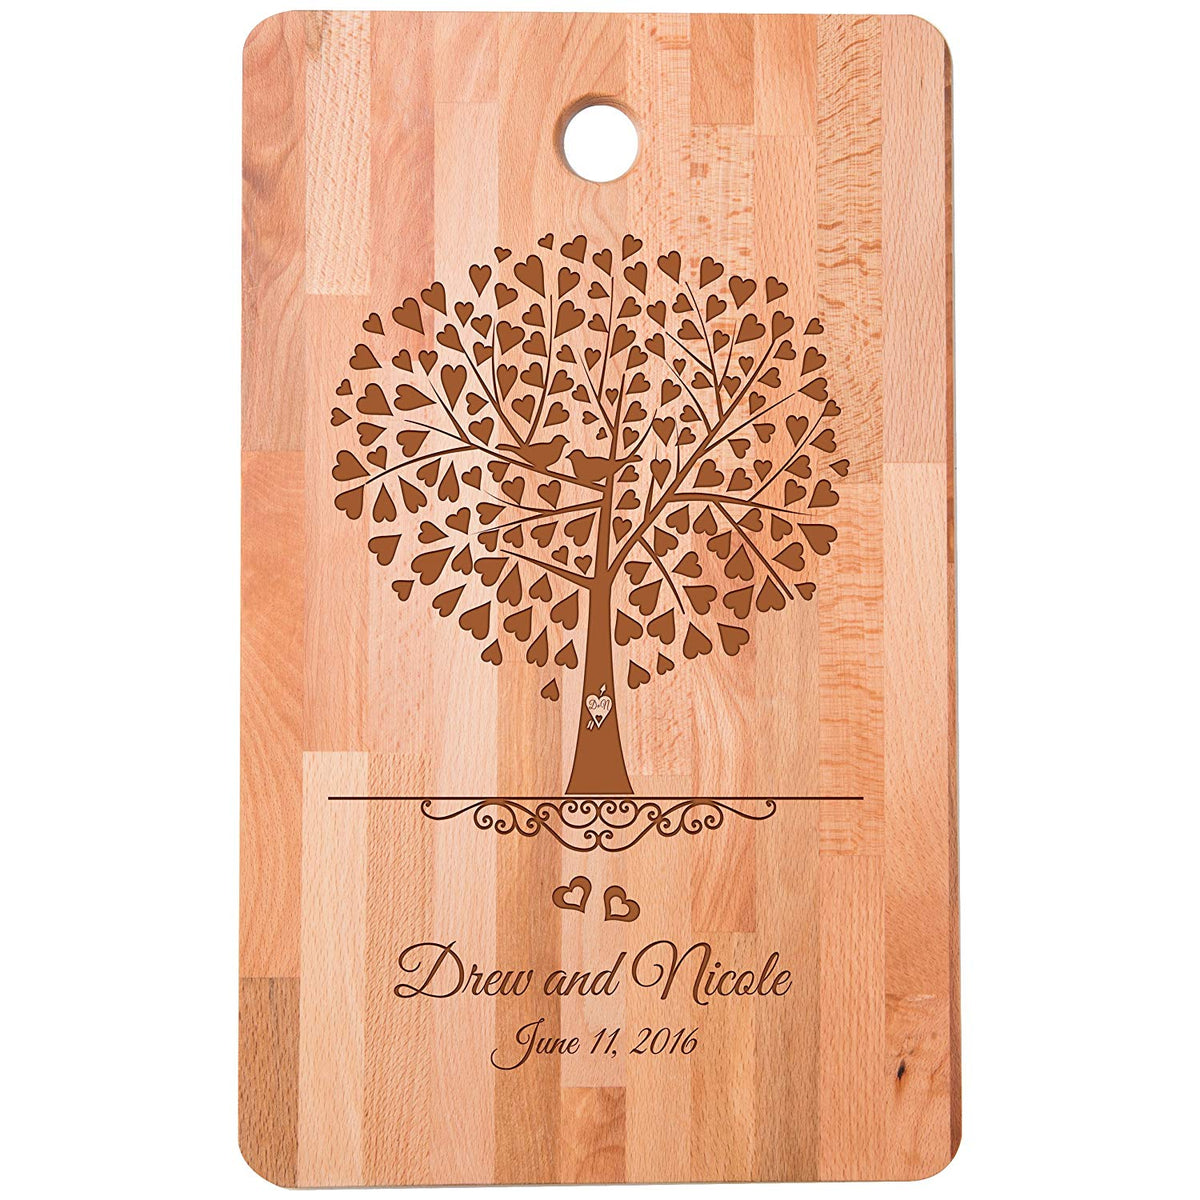 Personalized bamboo Wedding Cutting Board Gift - Established Date - LifeSong Milestones